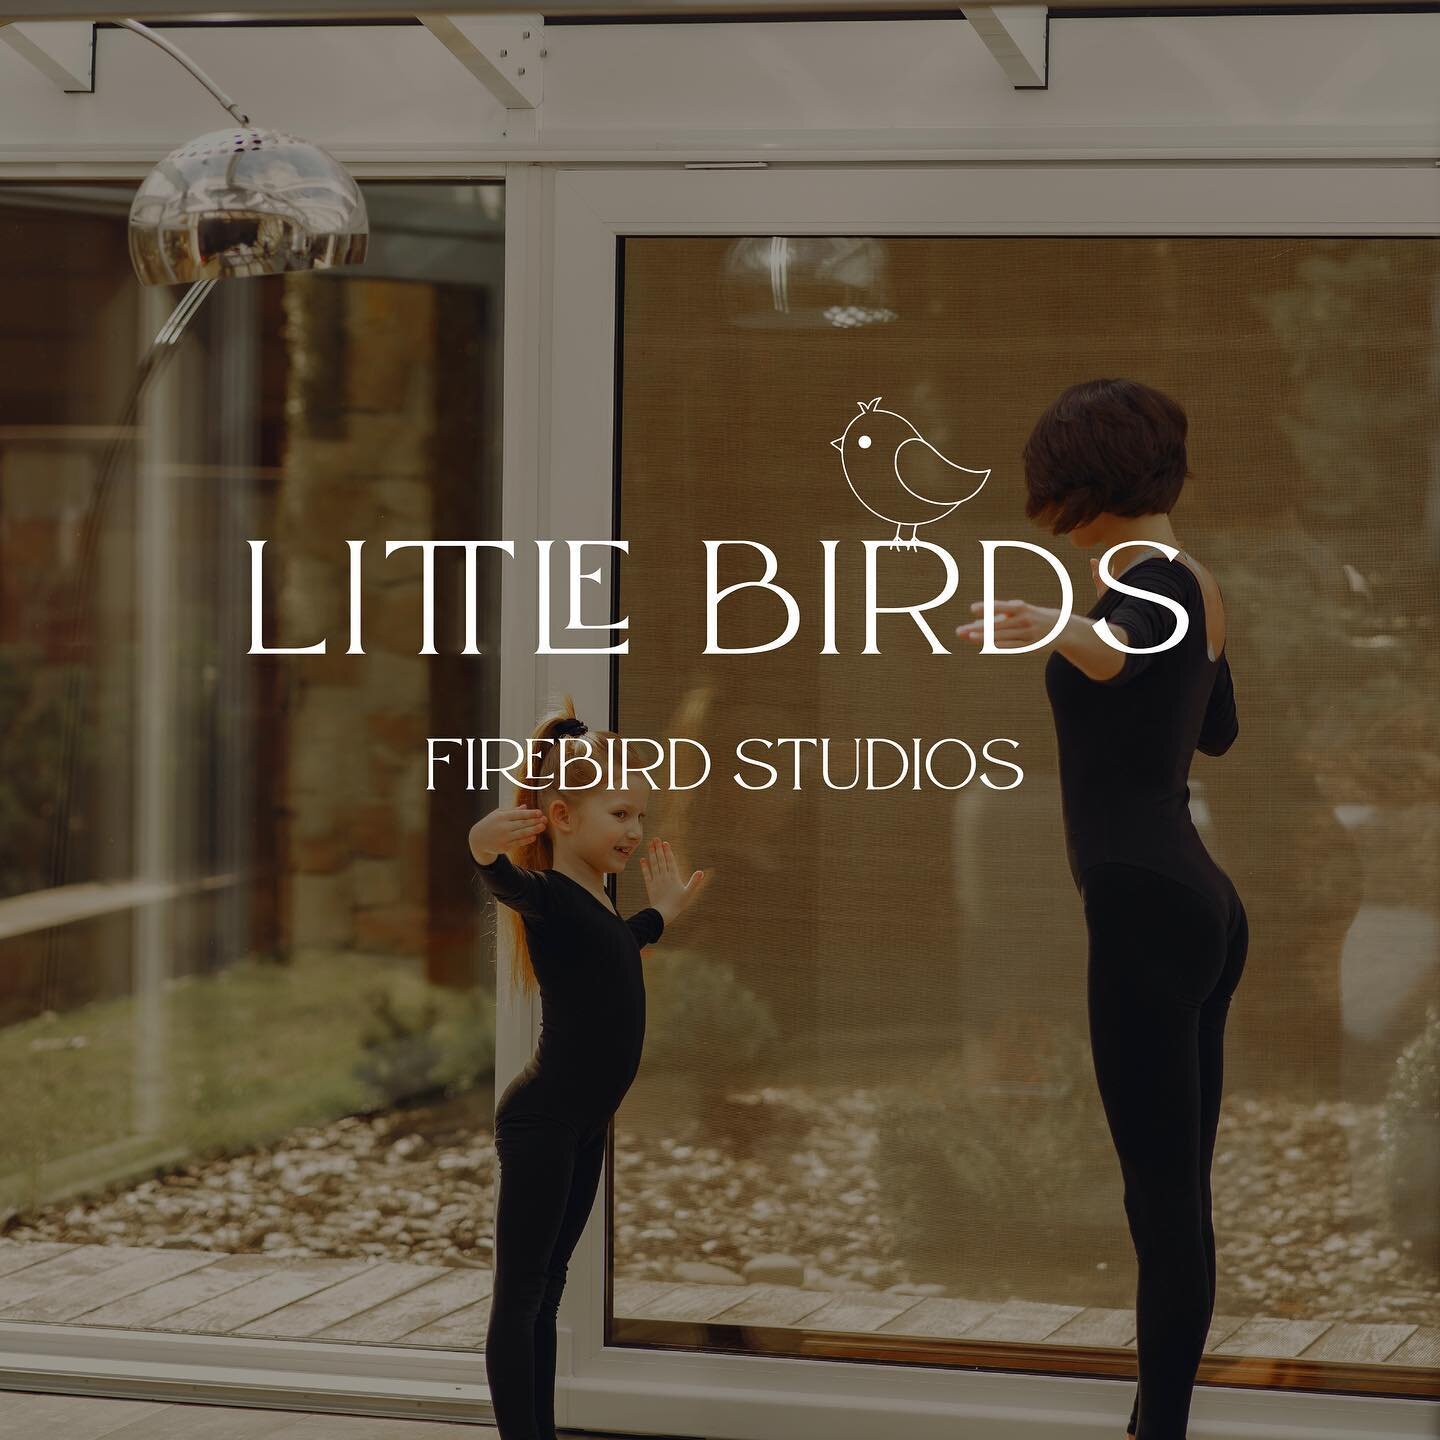 Here is the brand extension for @firebirdstudios - Little Birds! The design stays true to the original logo- simple and minimalistic, but leans a bit more playful and youthful by connecting the Ts and of course adding the sweet bird! 

#makeyourmark 